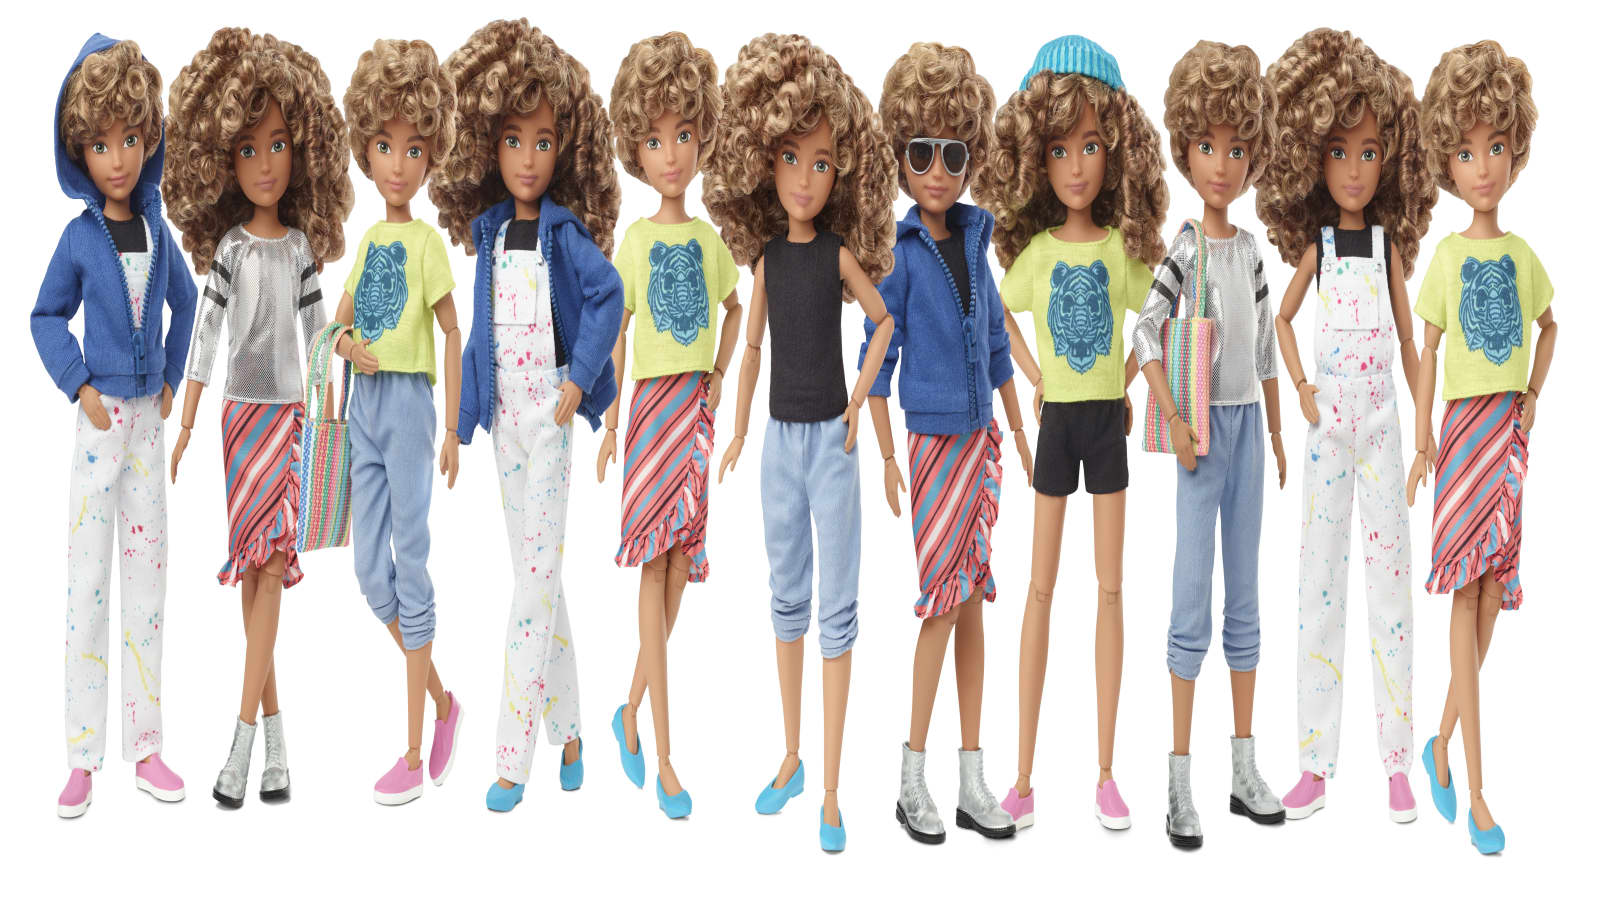 Mattel Launches Doll & Book Line to Champion Equality & Unity